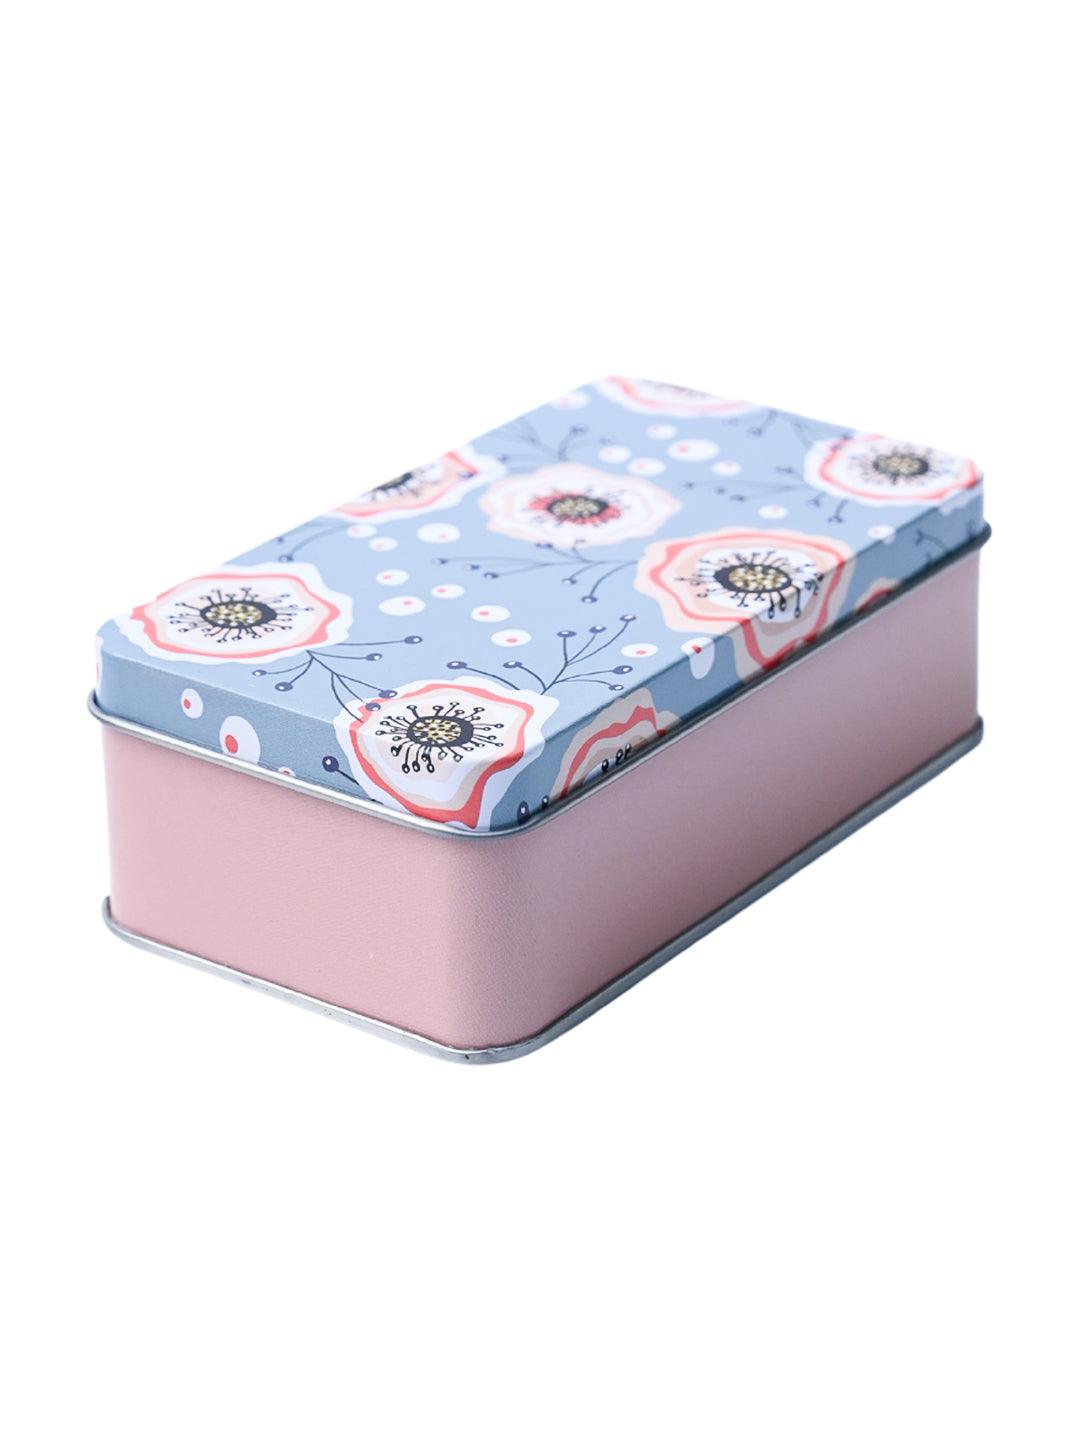 Buy Storage boxes Online in India at Best Price @Upto 70% OFF – MARKET99